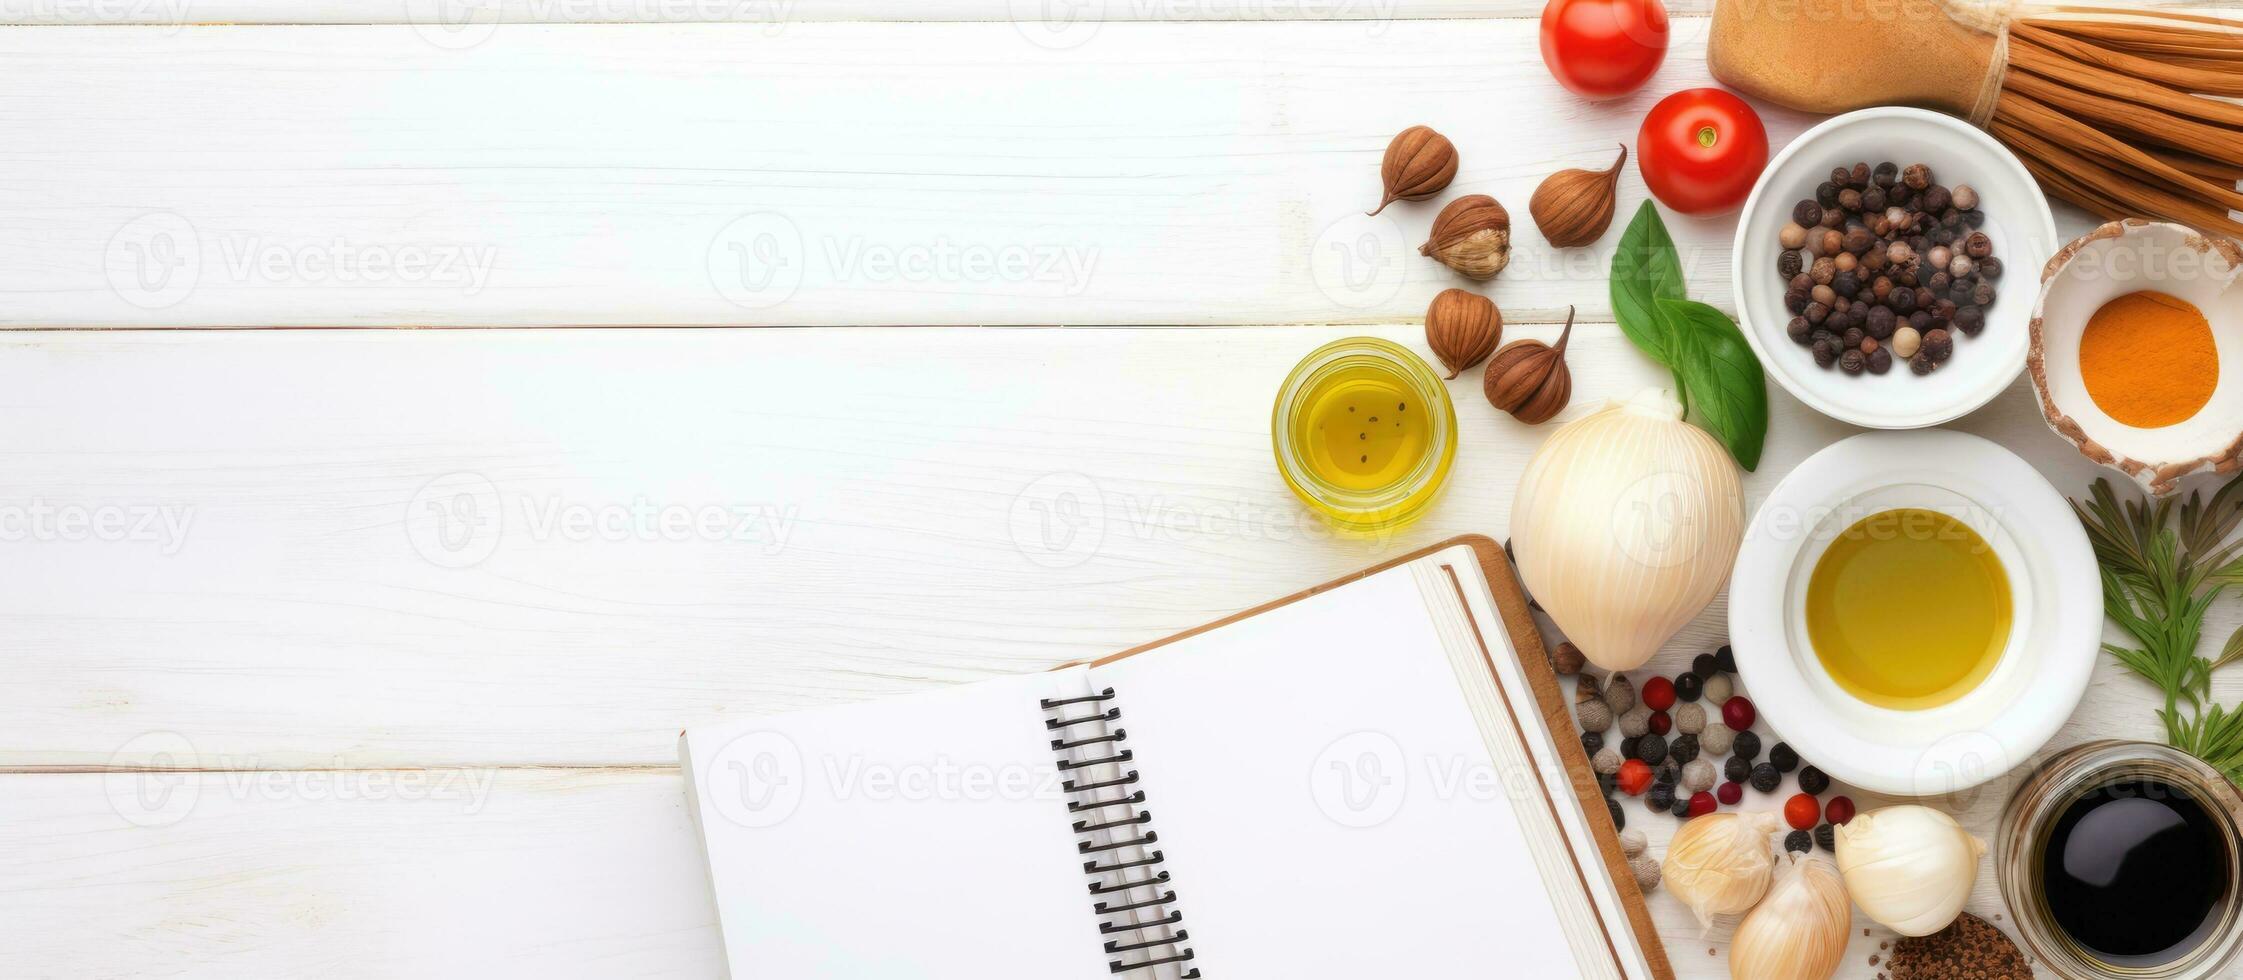 An open recipe book alongside various ingredients is placed on a white wooden table in a flat lay photo